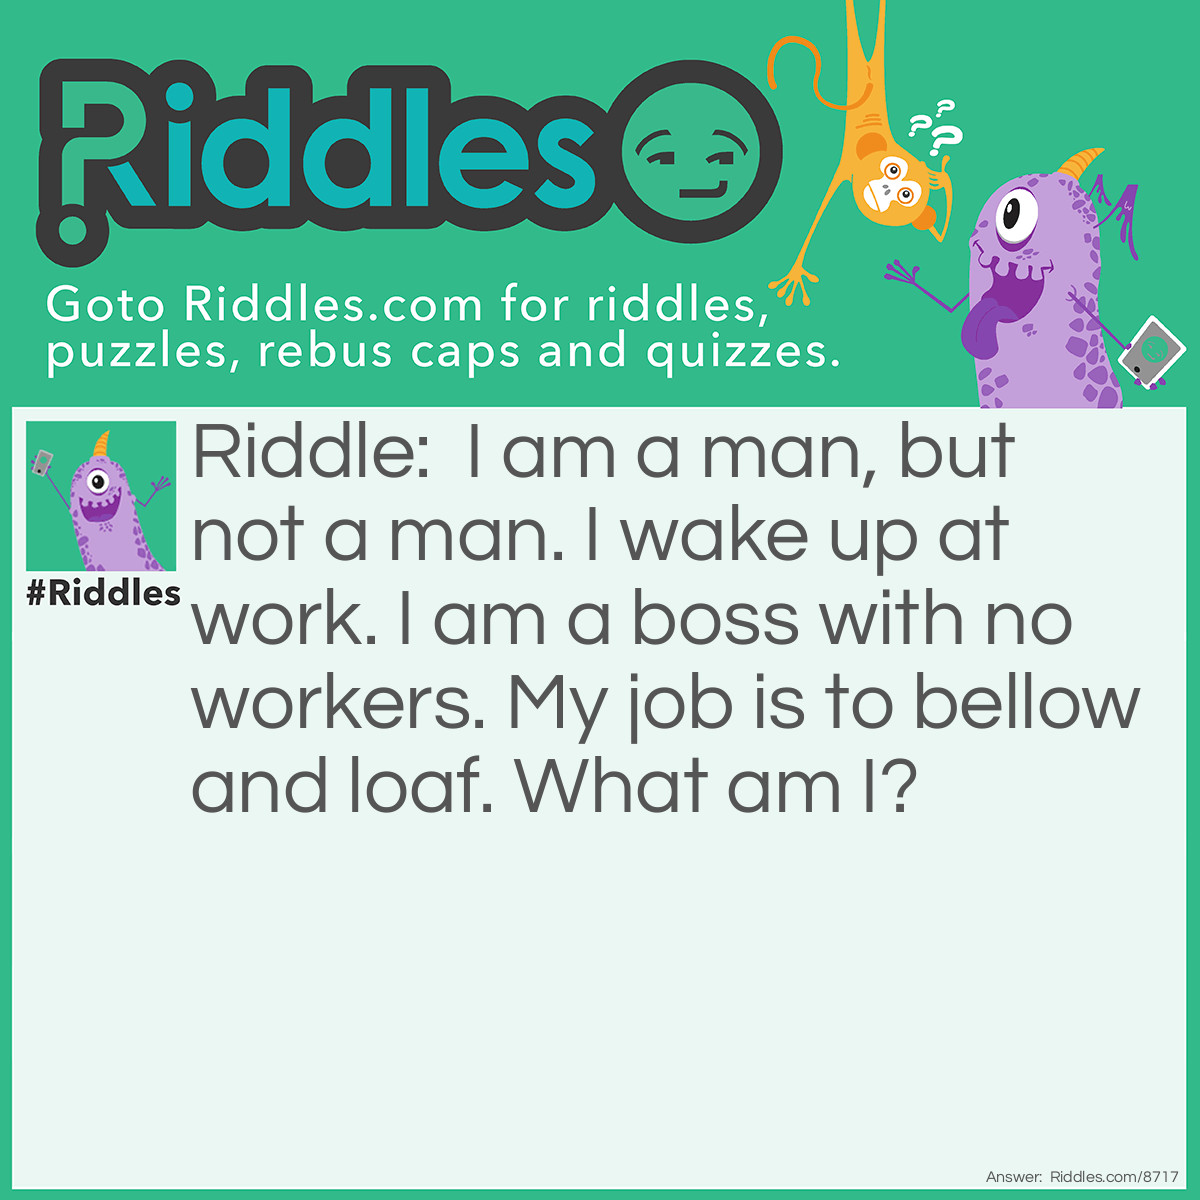 Riddle: I am a man, but not a man. I wake up at work. I am a boss with no workers. My job is to bellow and loaf. What am I? Answer: A Gorilla.